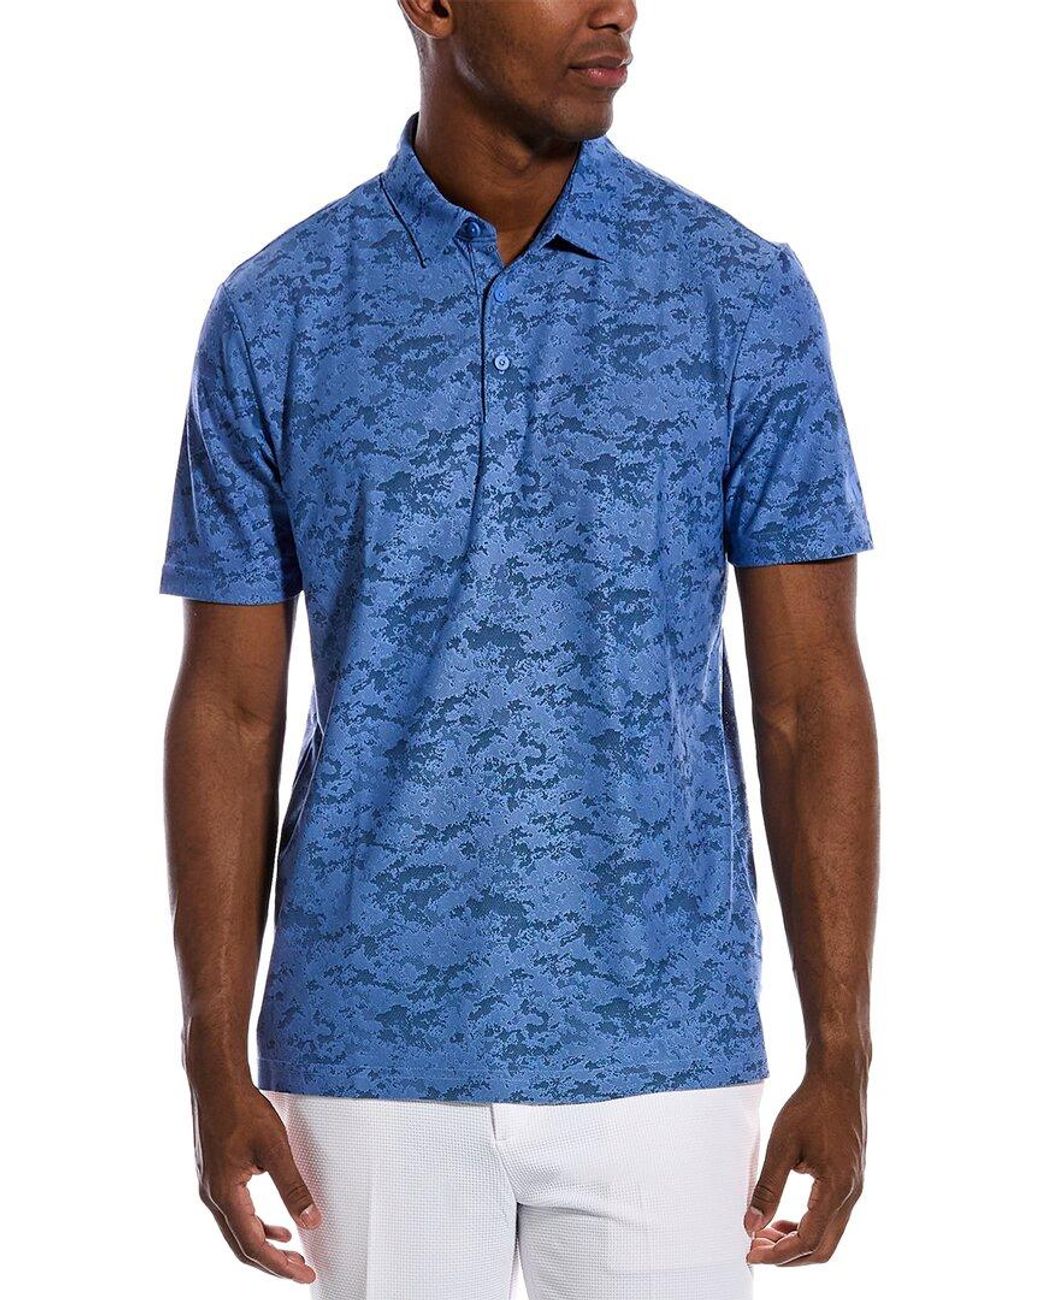 adidas Originals Textured Jacquard Polo Shirt in Blue for Men | Lyst